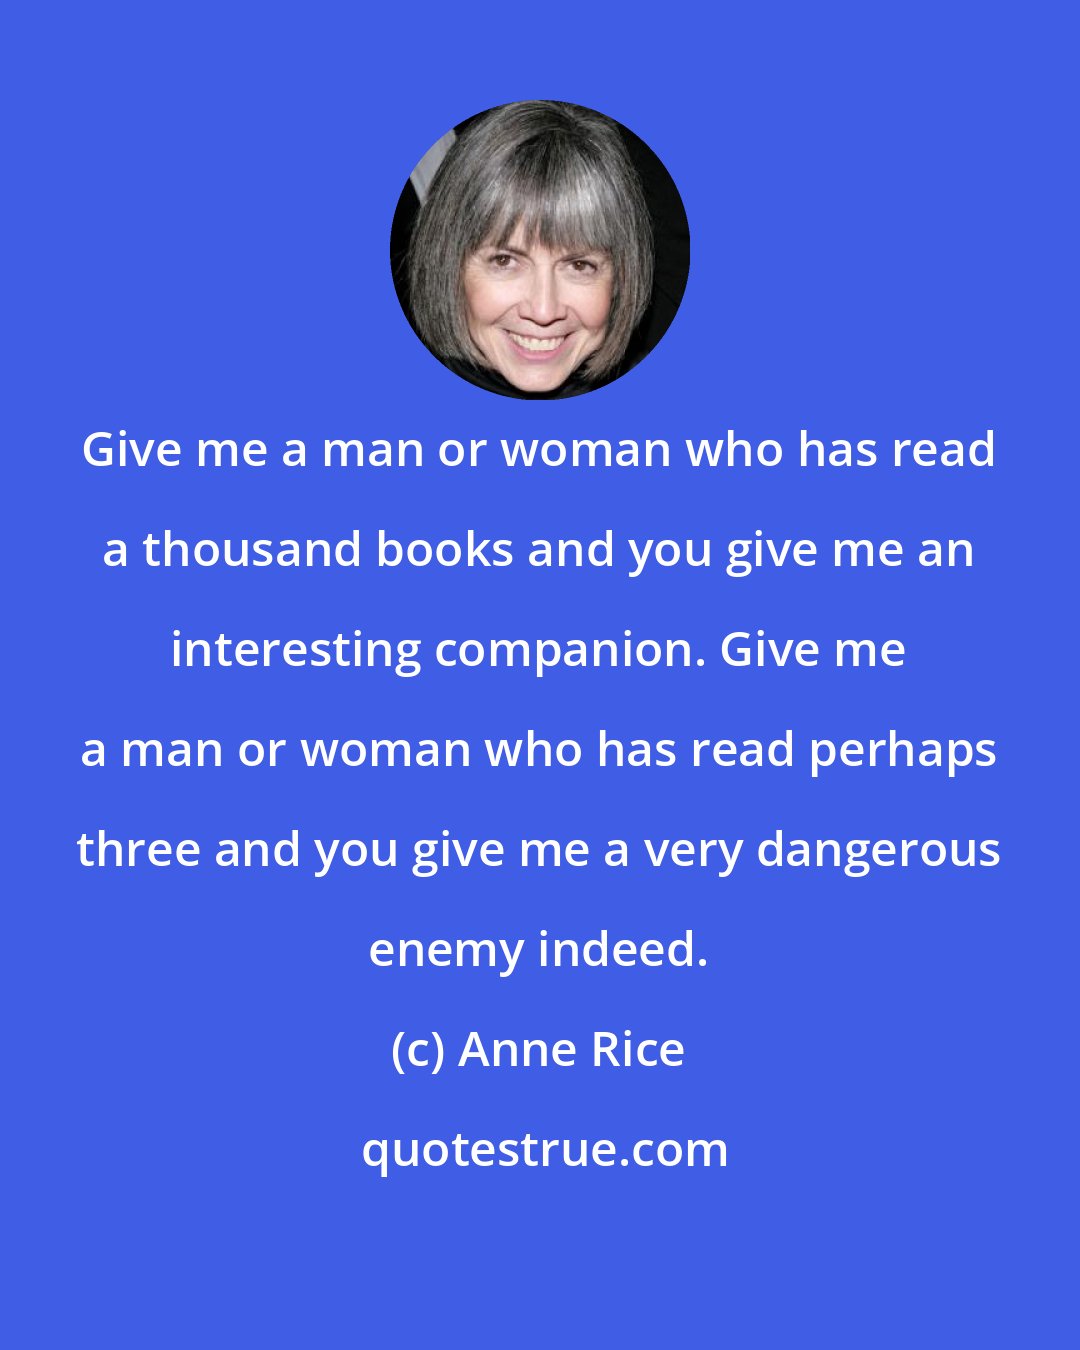 Anne Rice: Give me a man or woman who has read a thousand books and you give me an interesting companion. Give me a man or woman who has read perhaps three and you give me a very dangerous enemy indeed.